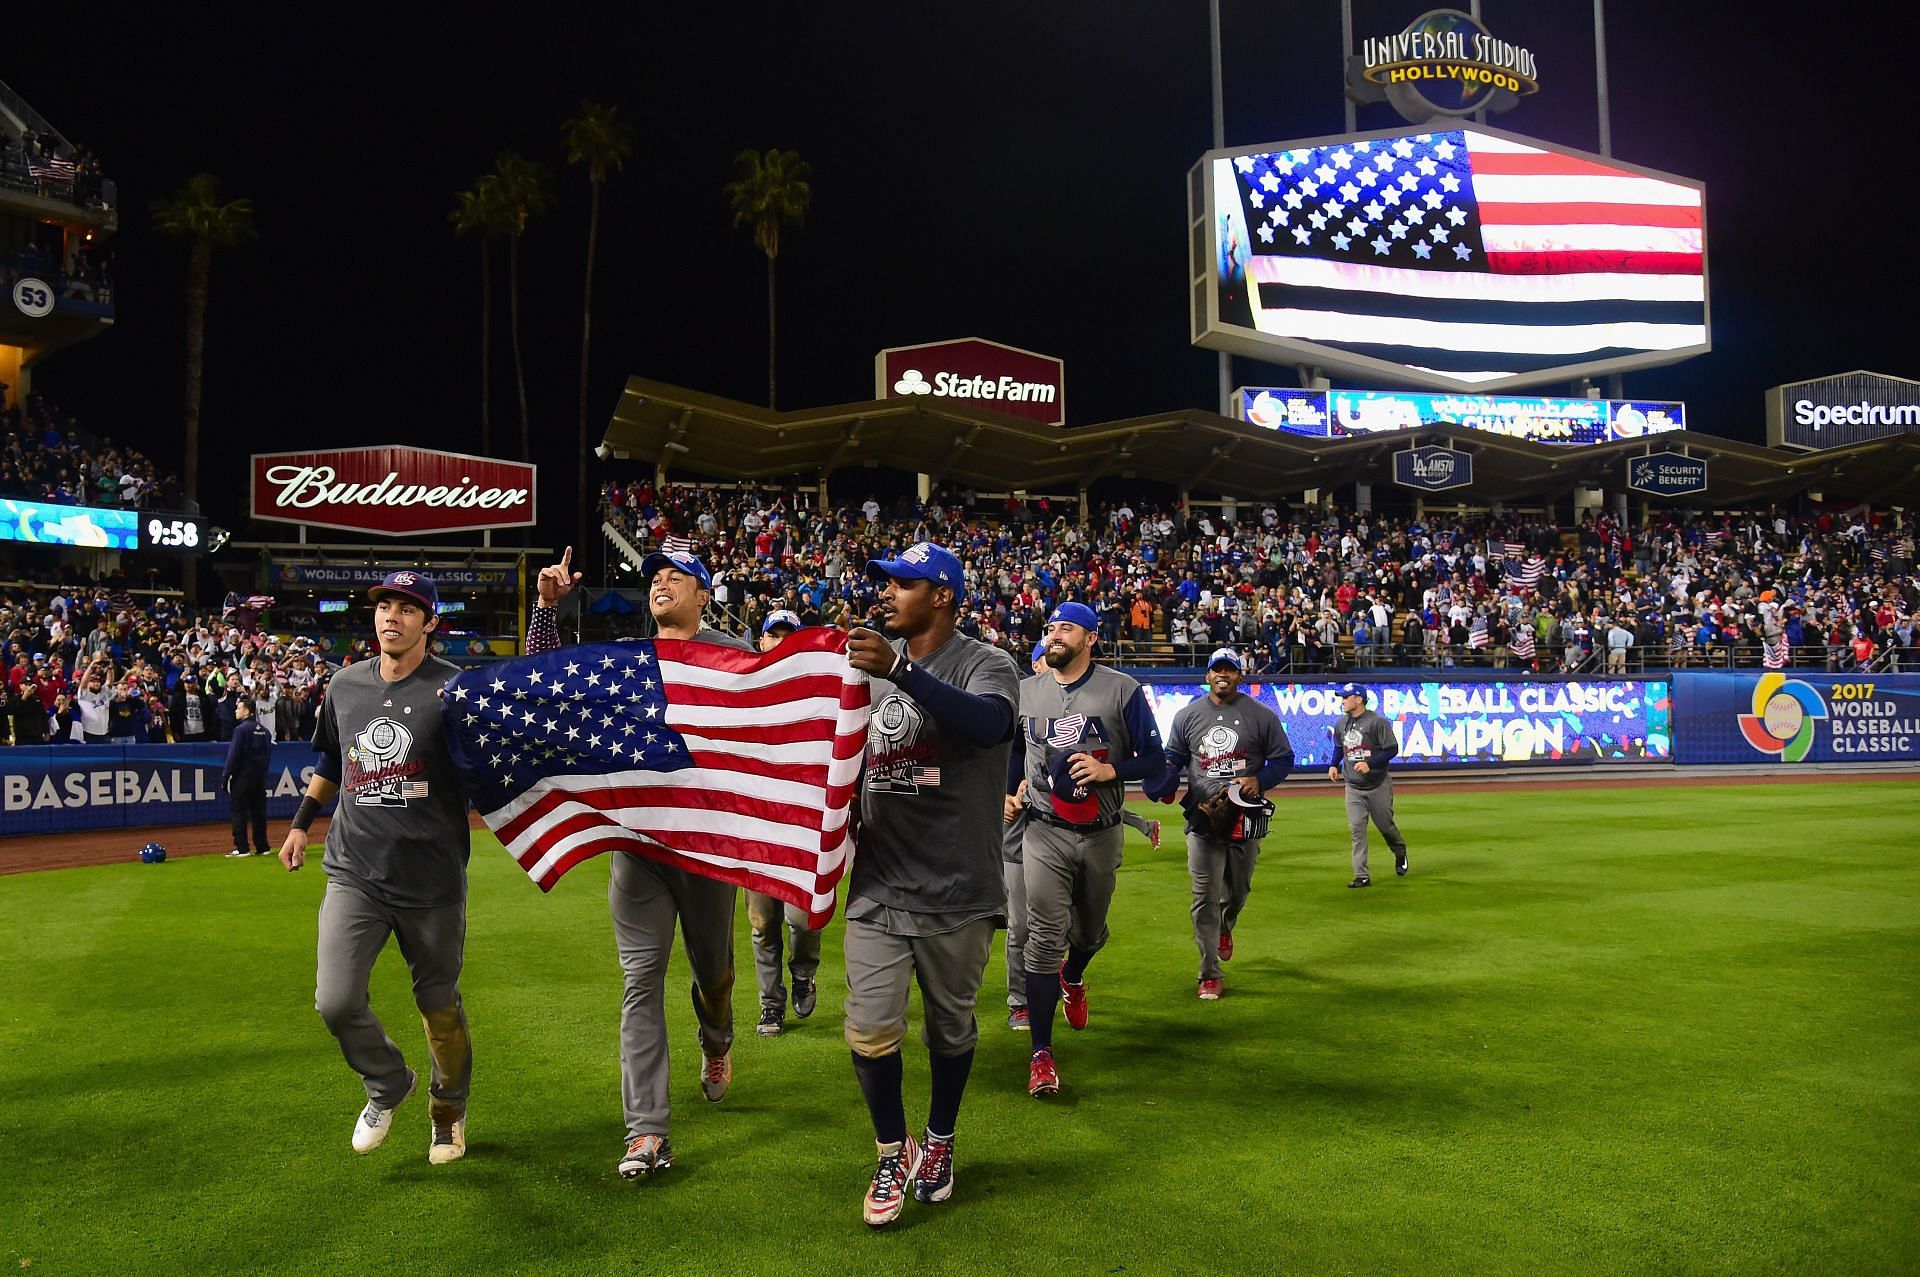 Christian Yelich Giancarlo Stanton and Adam Jones celebrate with the American Flag at the 2017 World Baseball Classic at Dodger Stadium